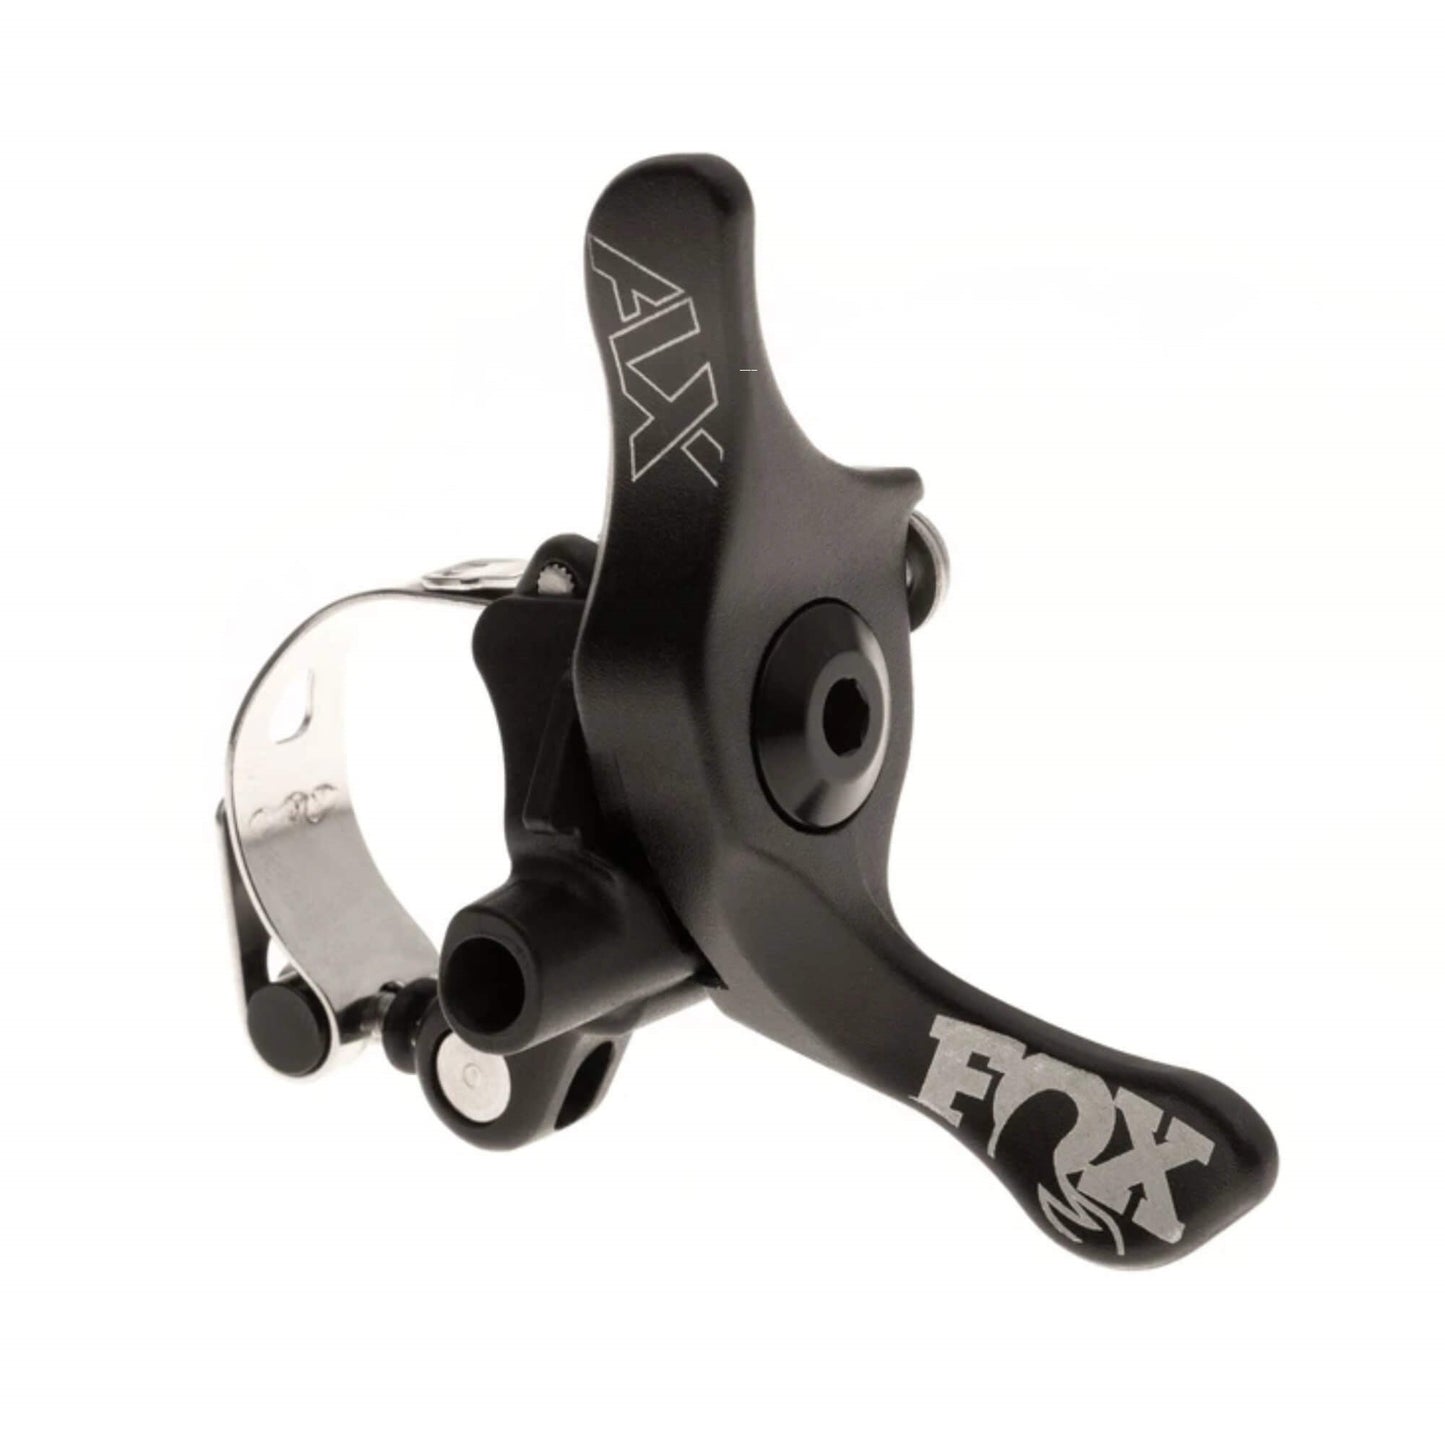 Fox Factory Transfer Remote Lever - Universal Clamp - Black - Image 1